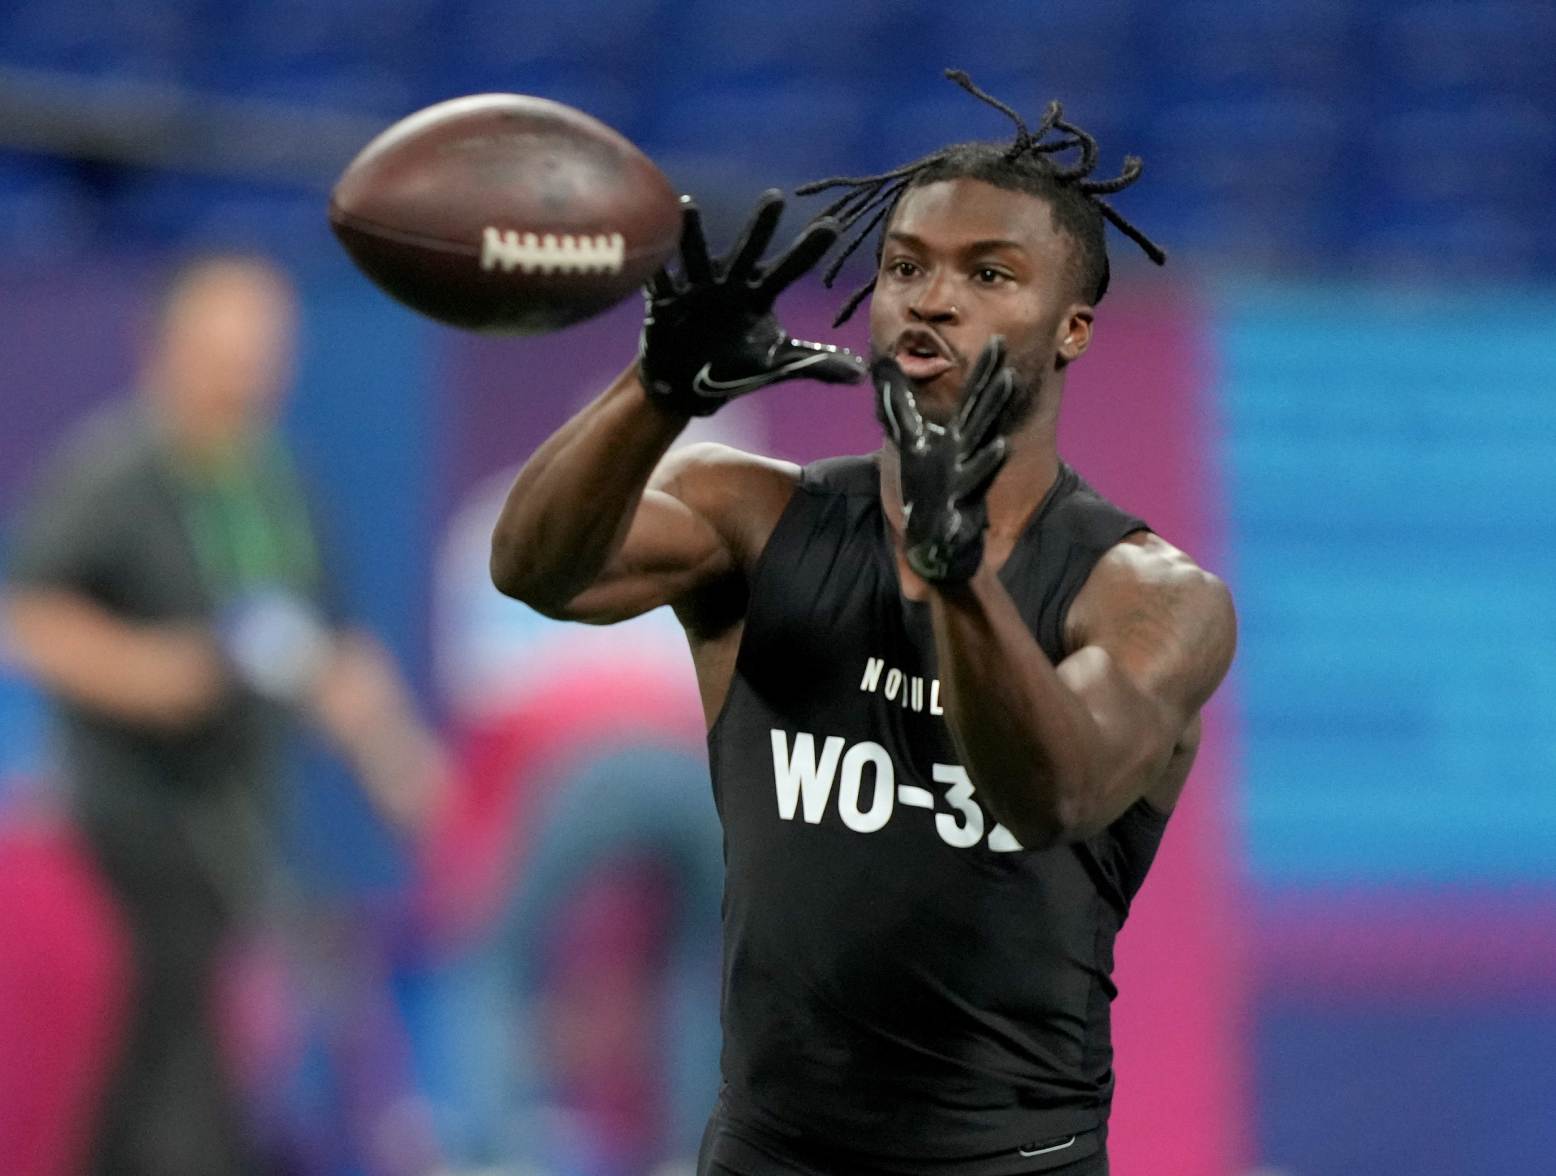 Mar 2, 2024; Indianapolis, IN, USA; North Carolina wide receiver Tez Walker (WO32) during the 2024 NFL Combine at Lucas Oil Stadium. Credit: Kirby Lee-USA TODAY Sports